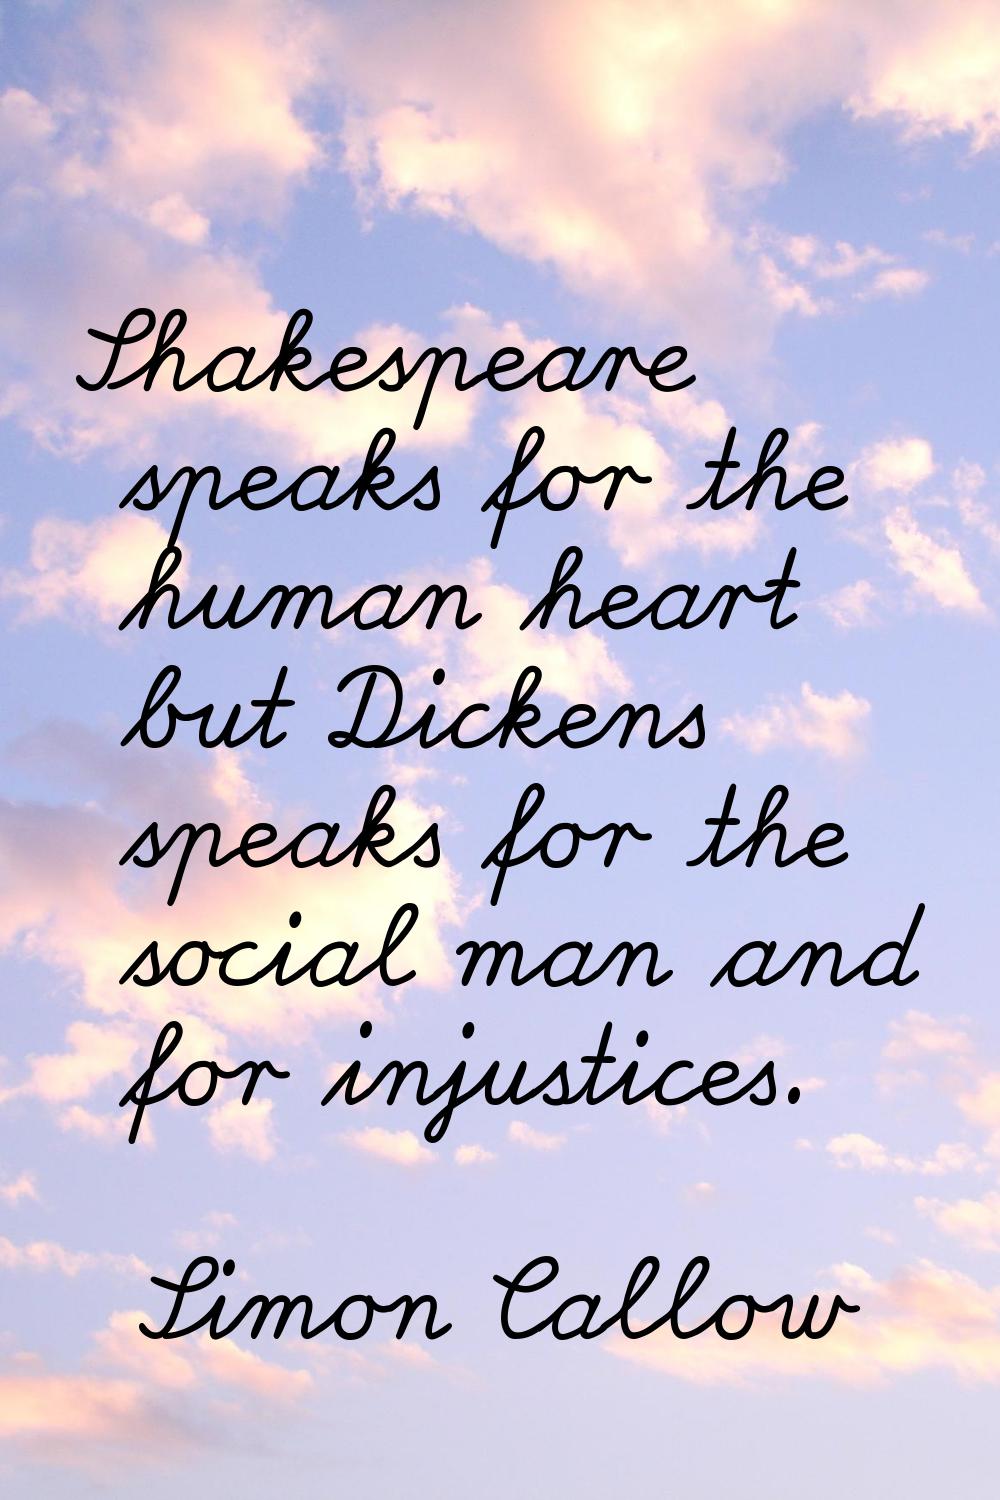 Shakespeare speaks for the human heart but Dickens speaks for the social man and for injustices.